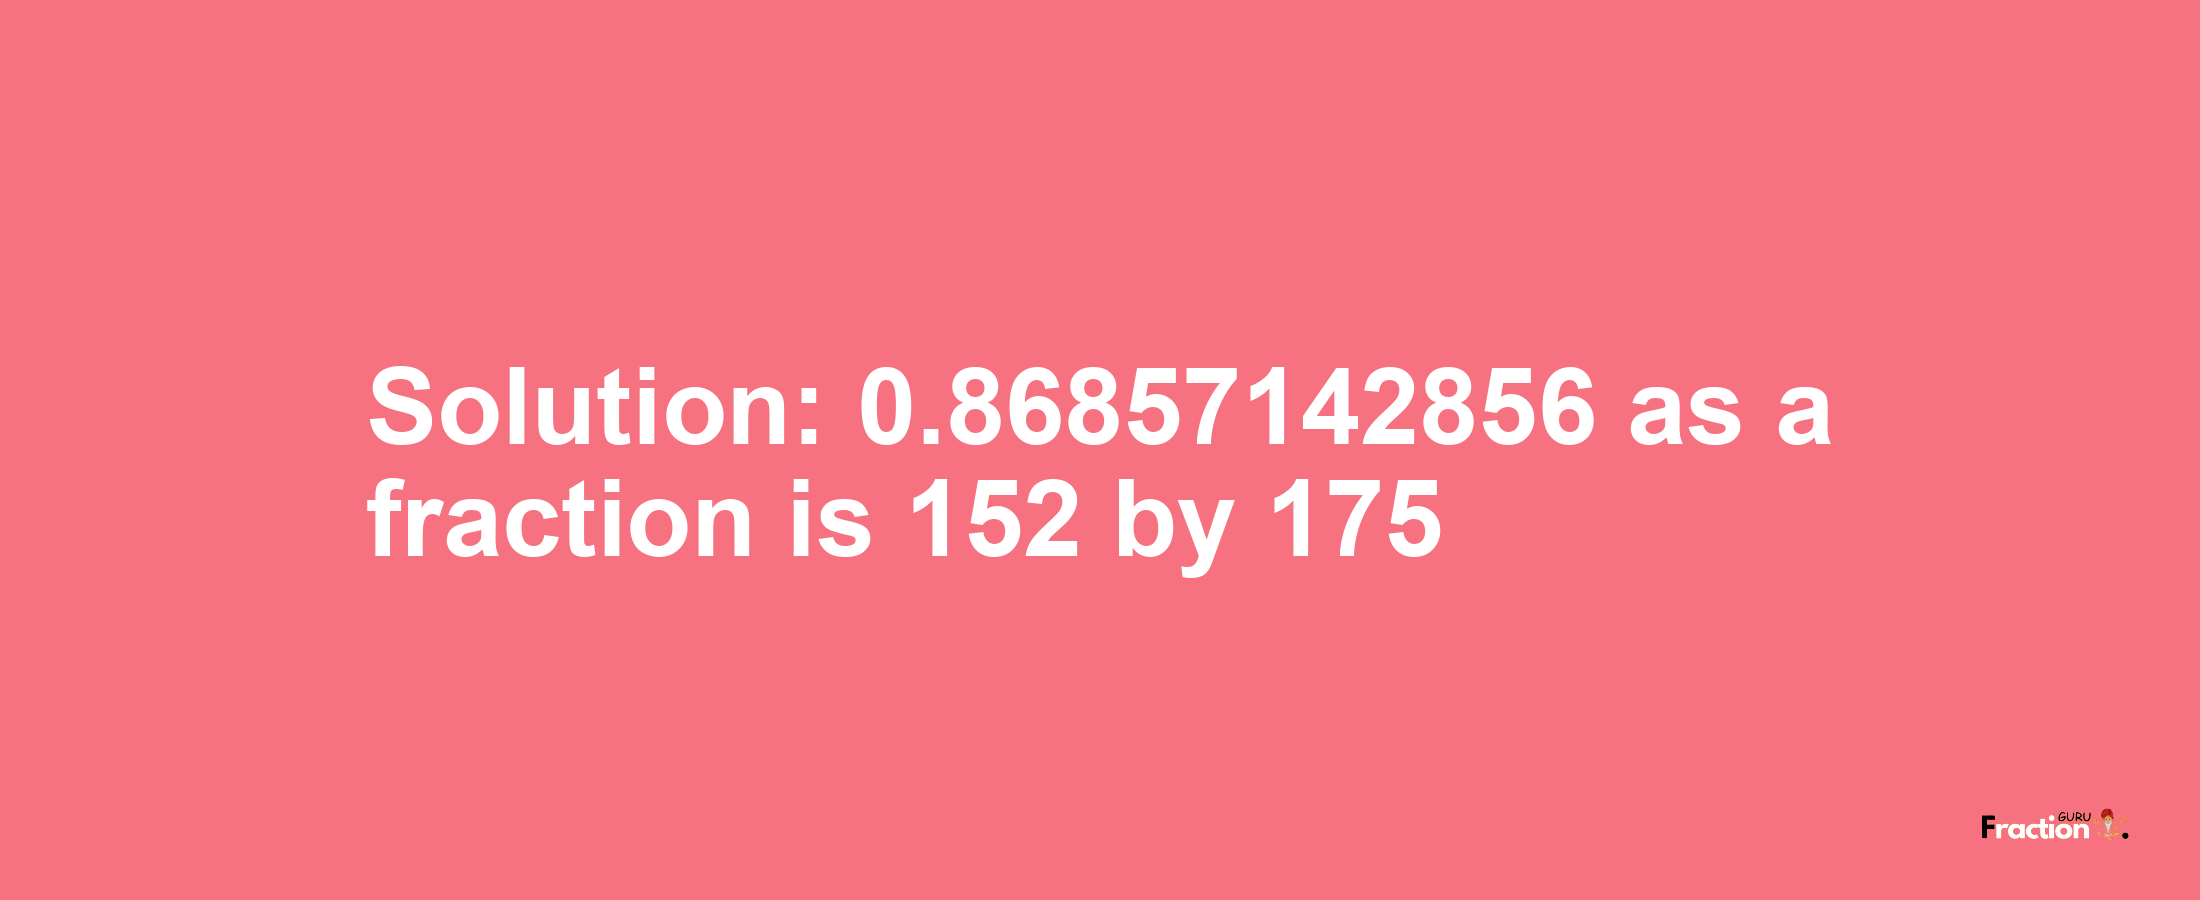 Solution:0.86857142856 as a fraction is 152/175